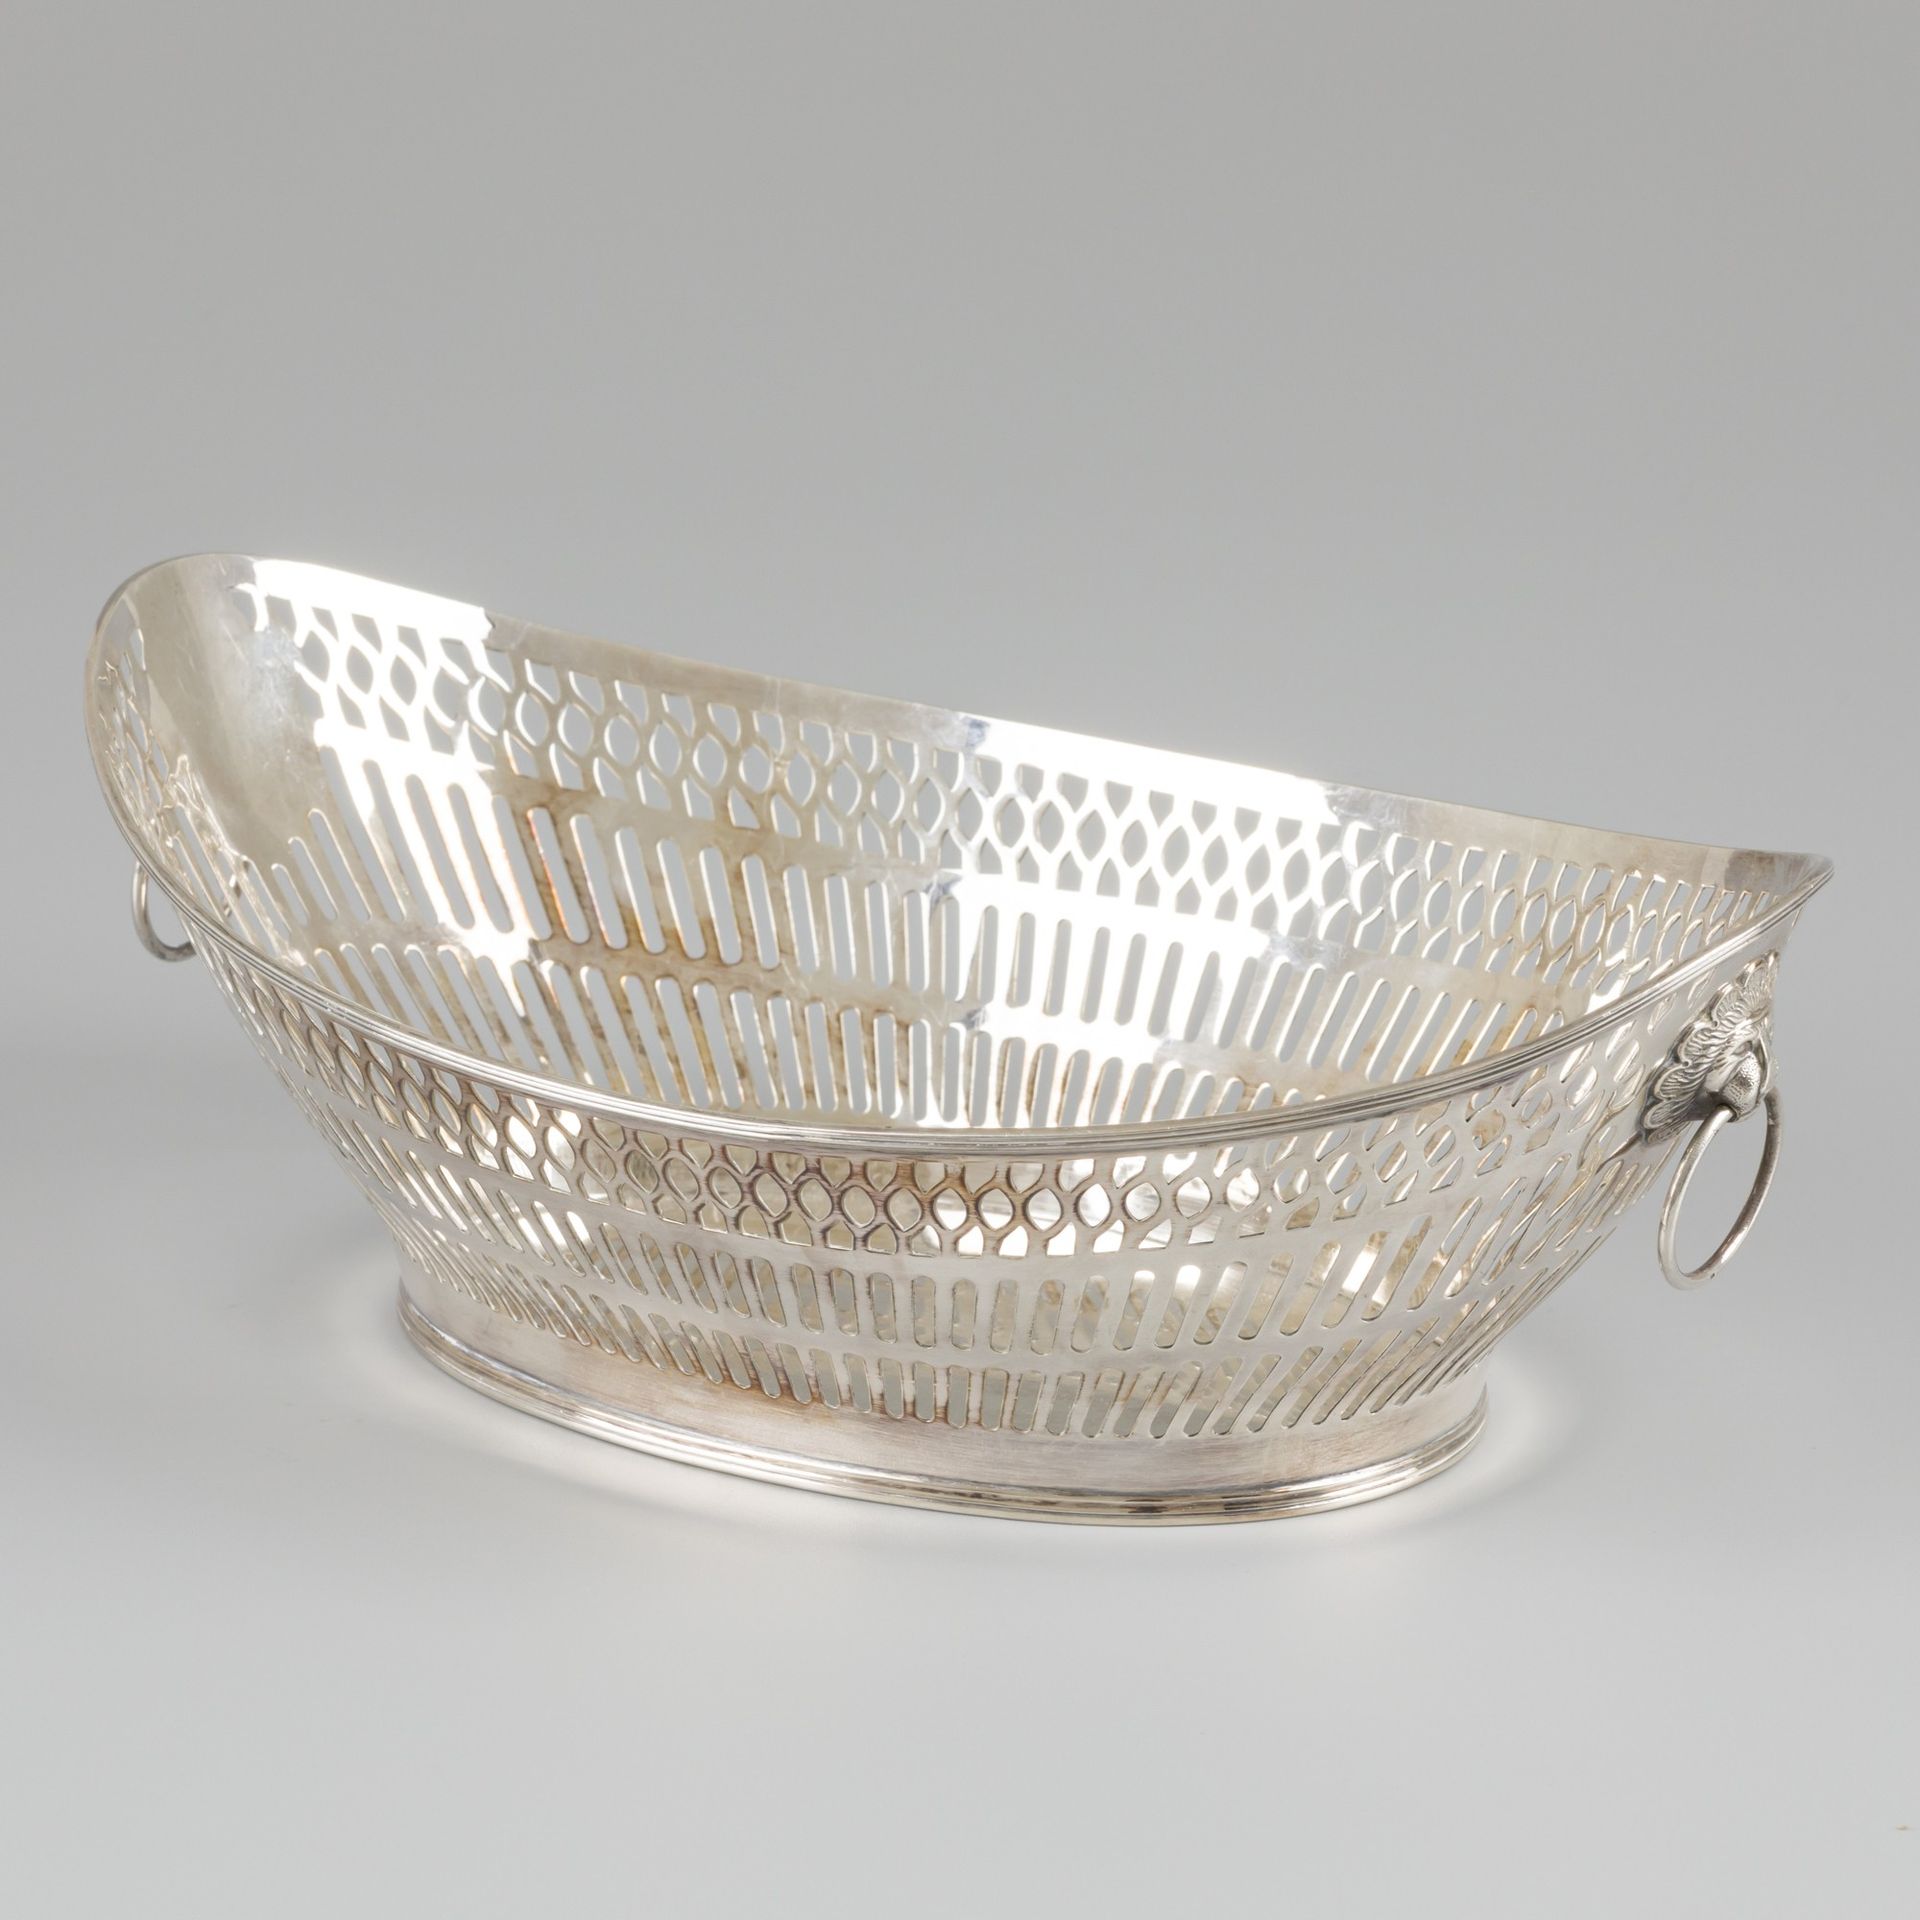 Bread basket silver. Boat-shaped model with edging, openwork sides and soldered &hellip;